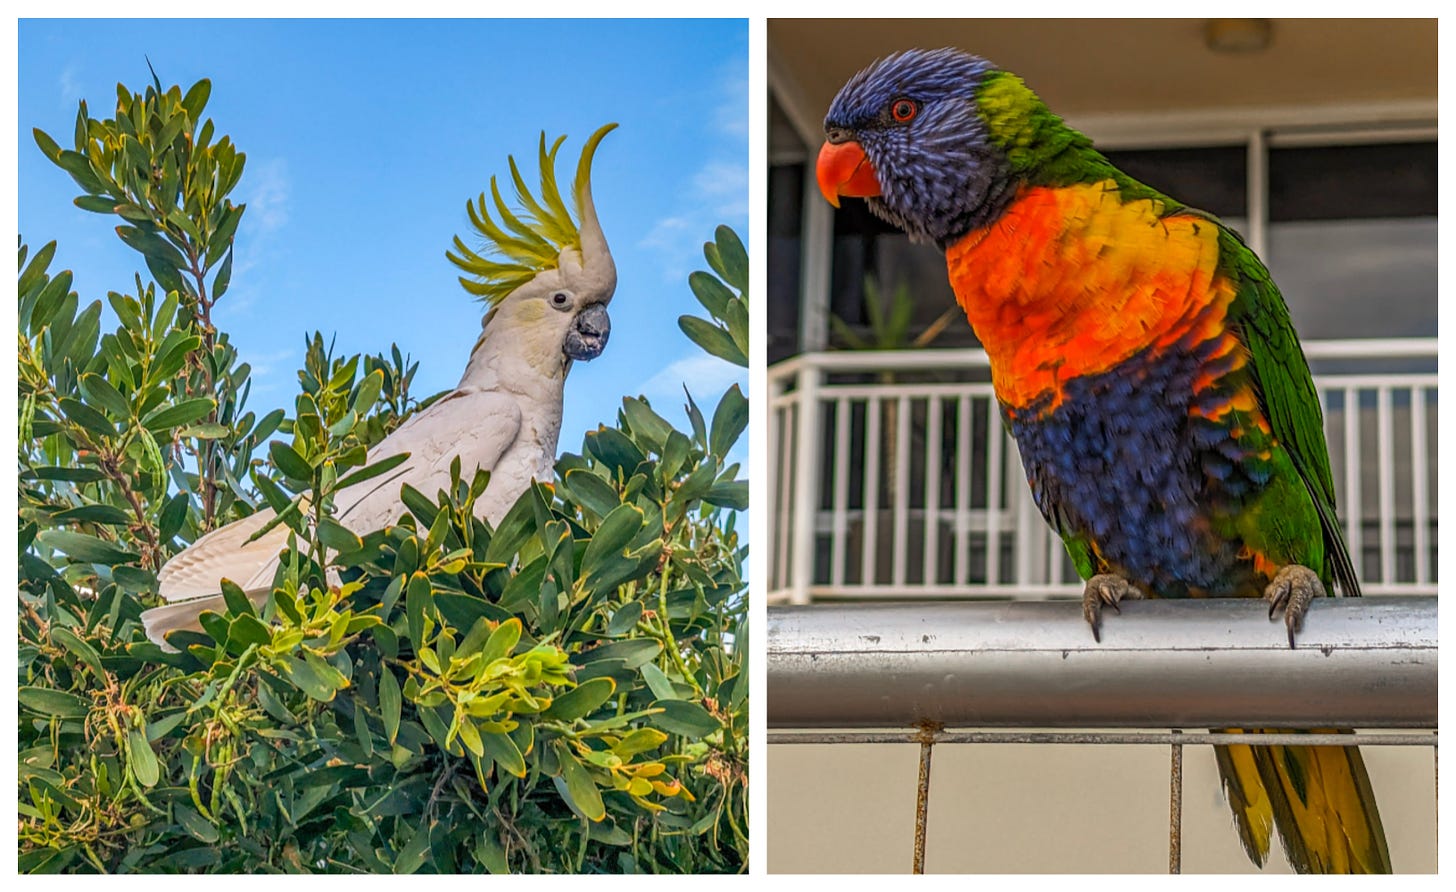 Photo on left shows a sufur crested cockatoo, picture on the right a lorikeet. 